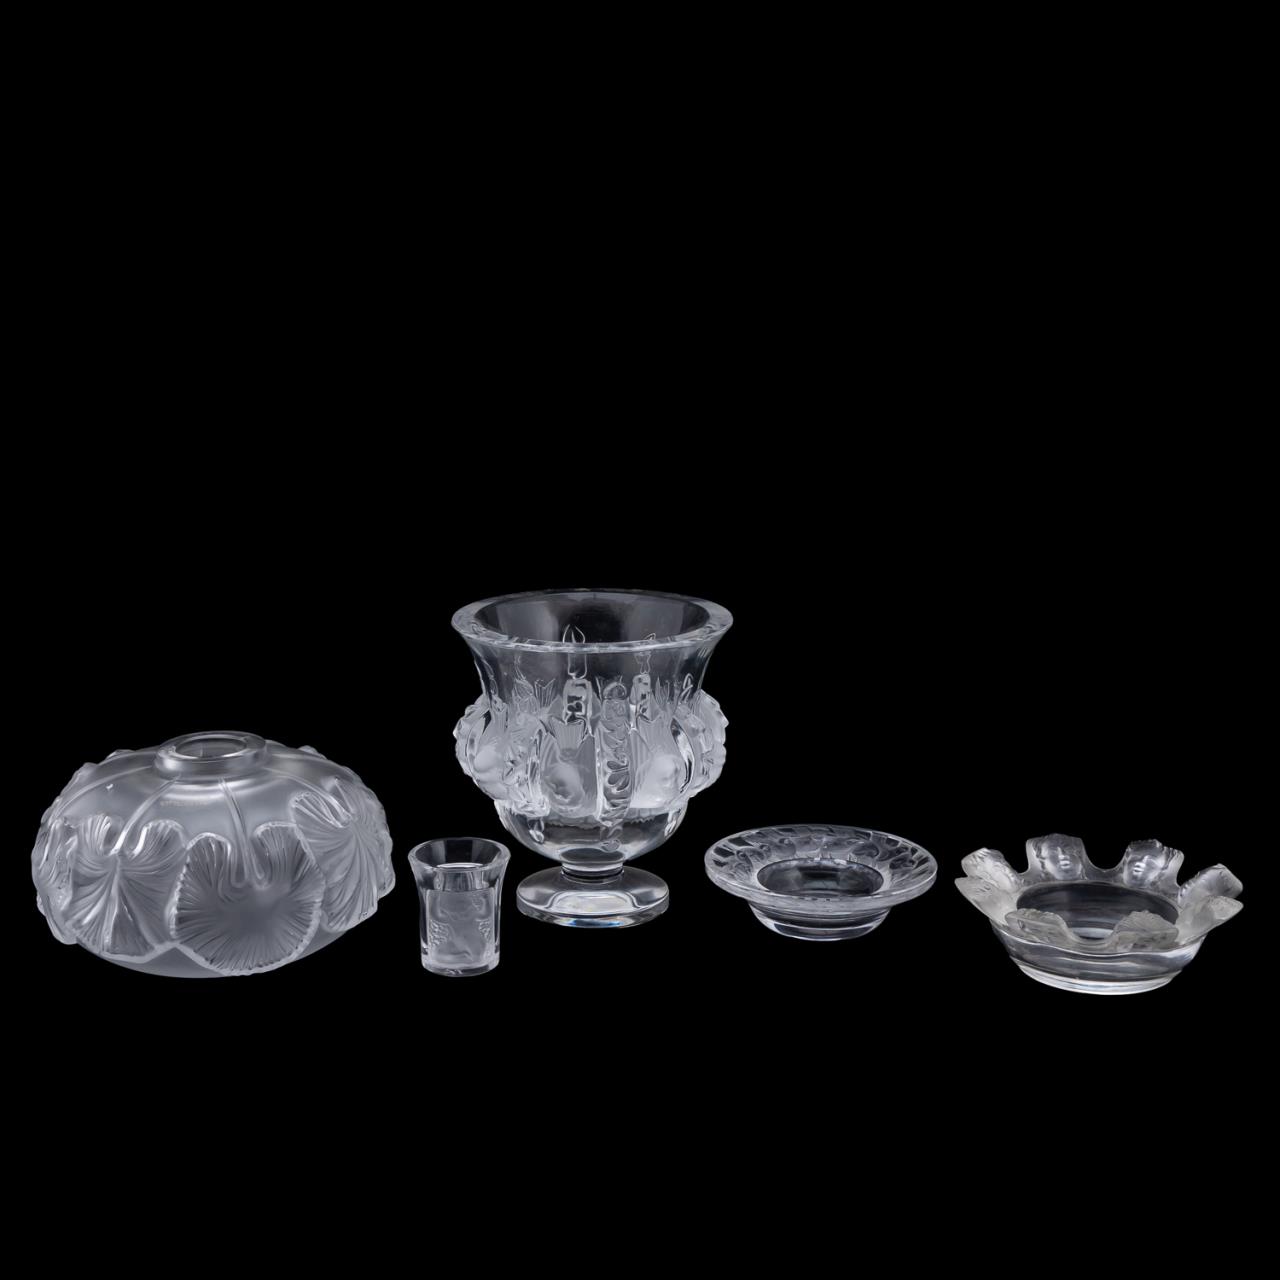 FIVE PIECES LALIQUE FROSTED GLASS 35af02